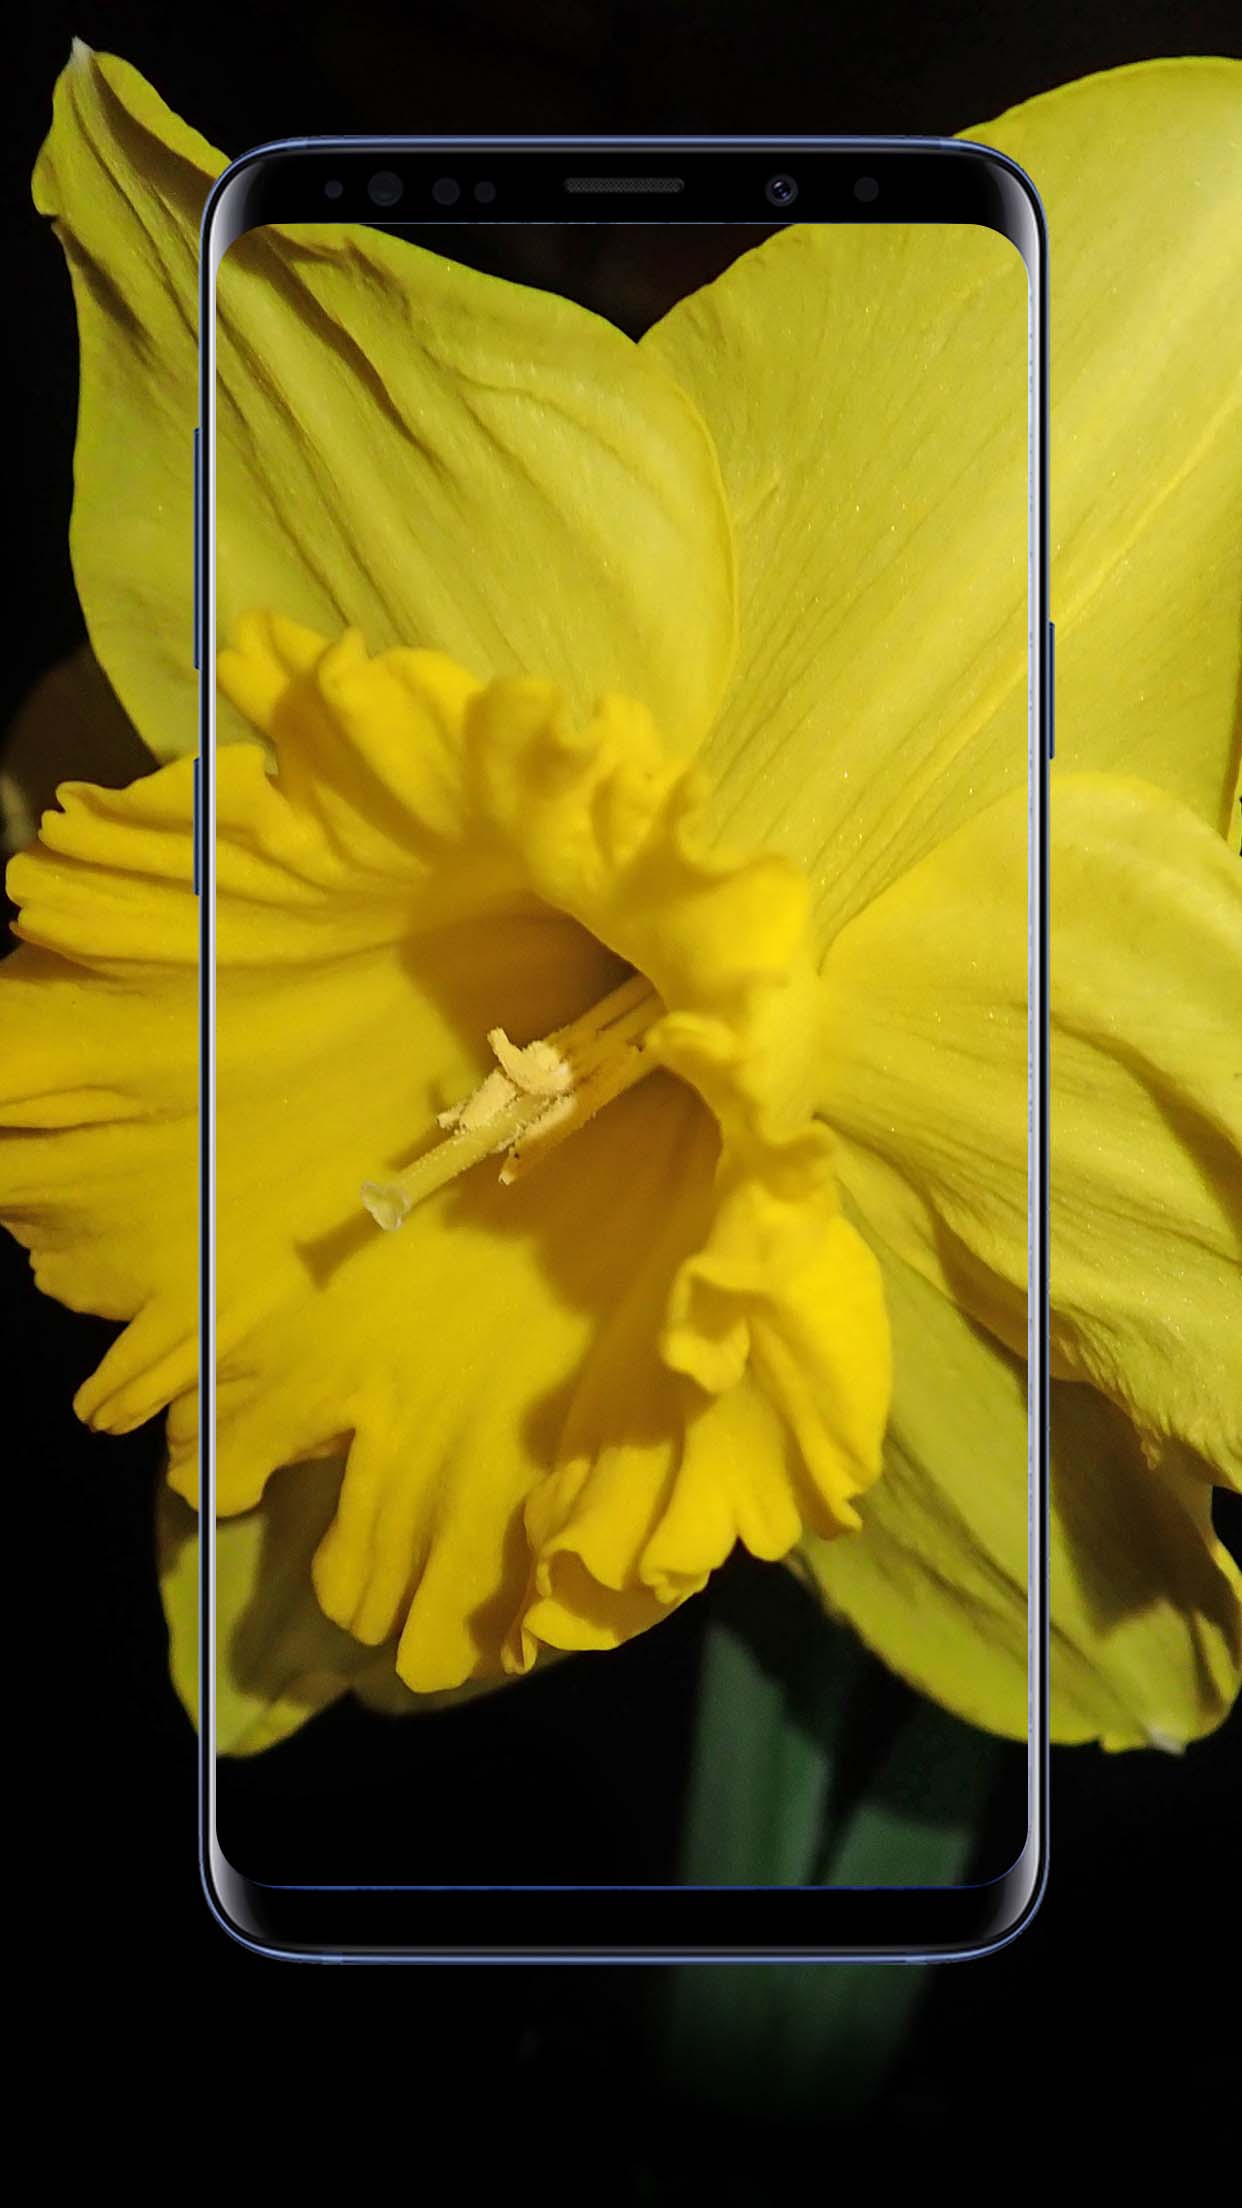 Daffodil Flower Wallpapers